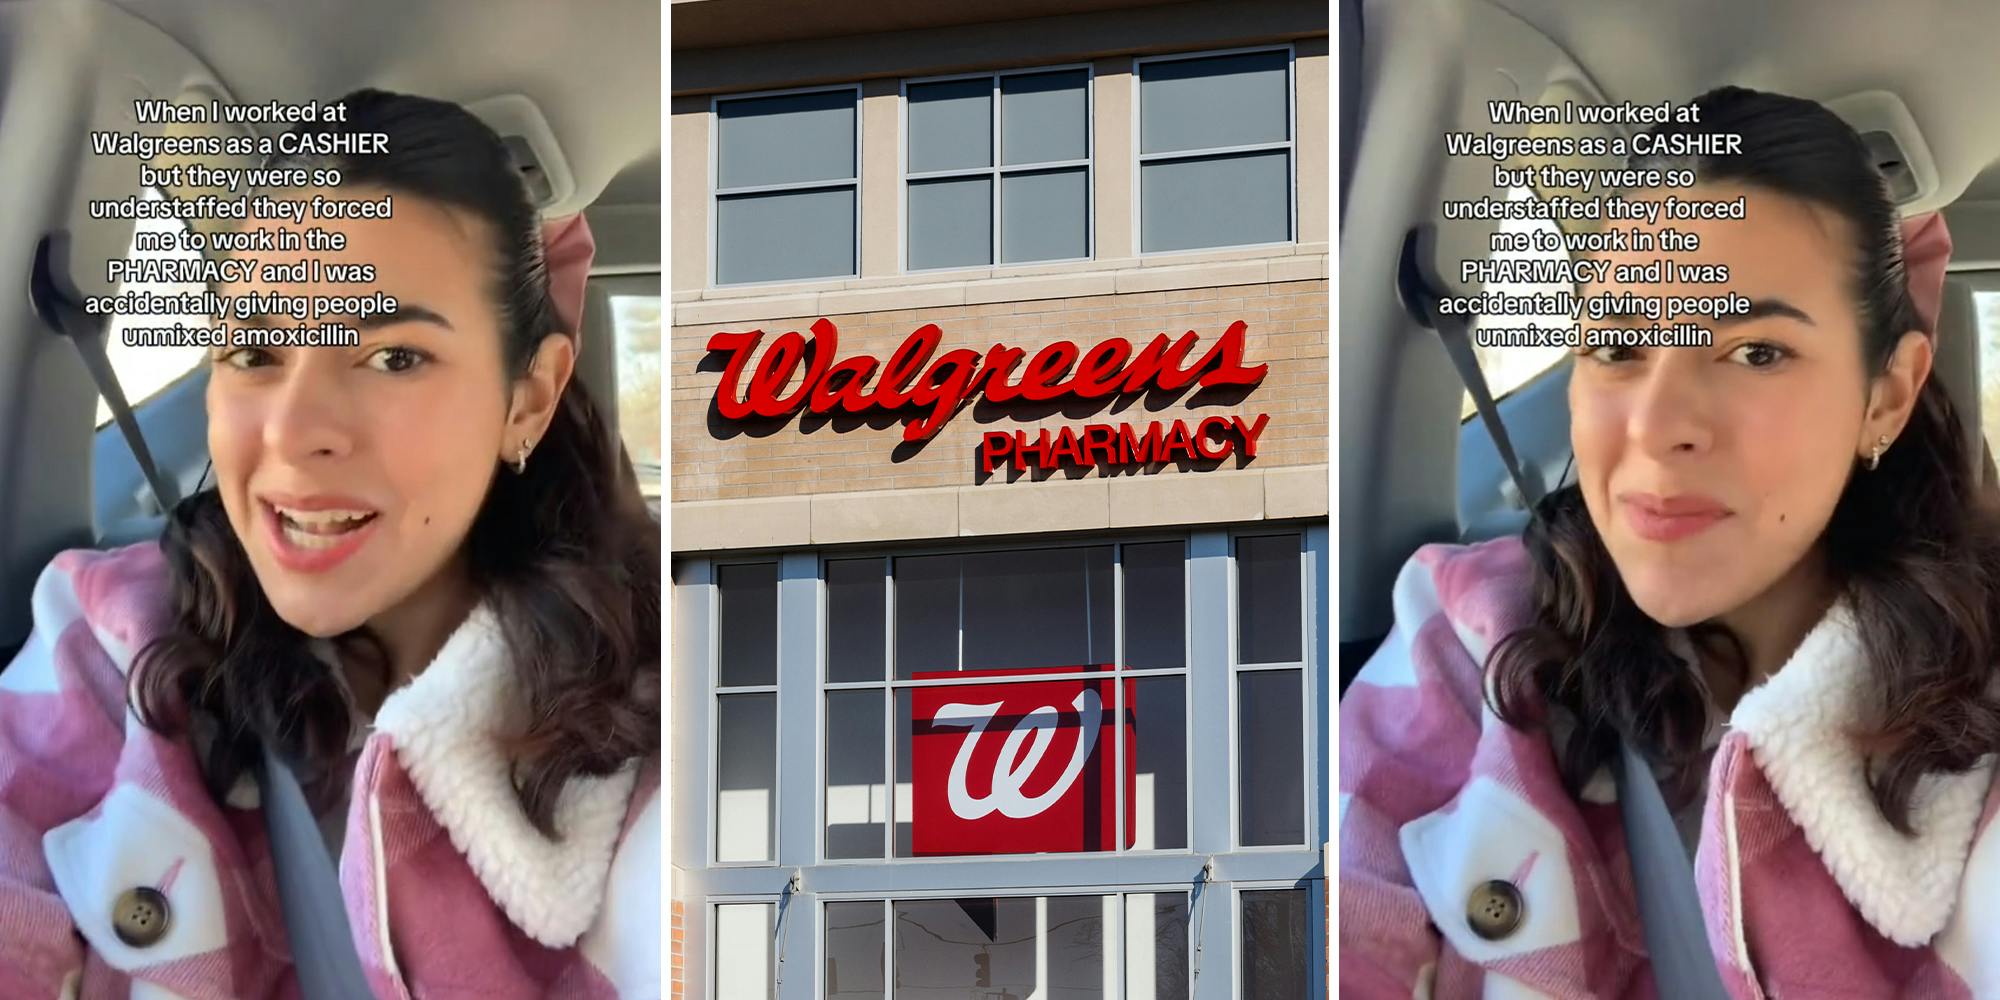 Walgreens worker says understaffed store made her work in the pharmacy even though she didn’t know what she was doing